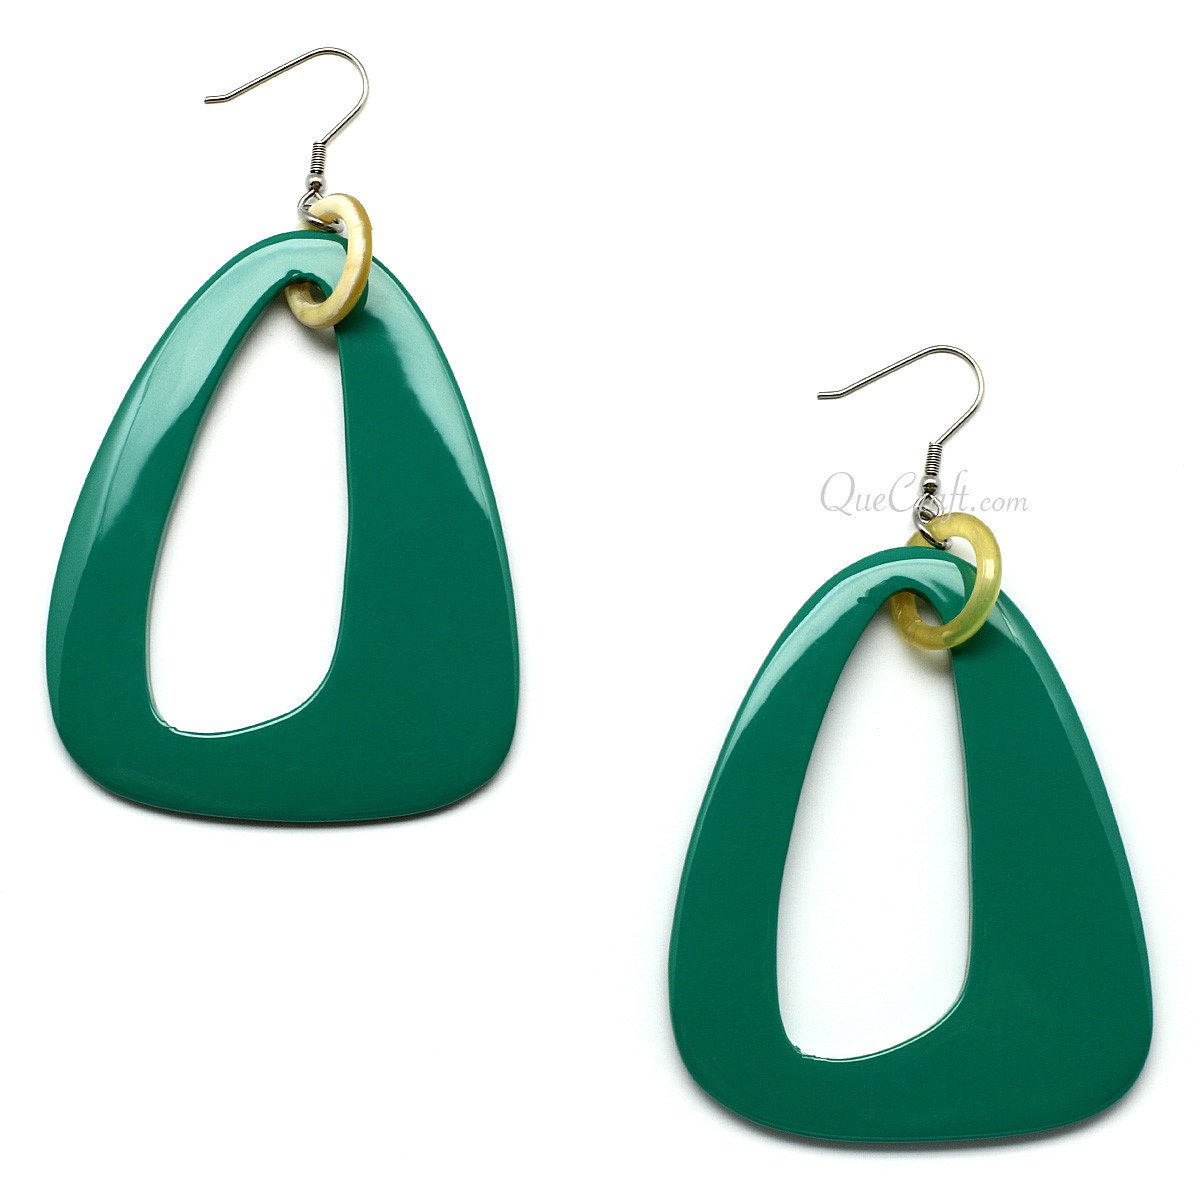 Horn & Lacquer Earrings #6193 - HORN JEWELRY